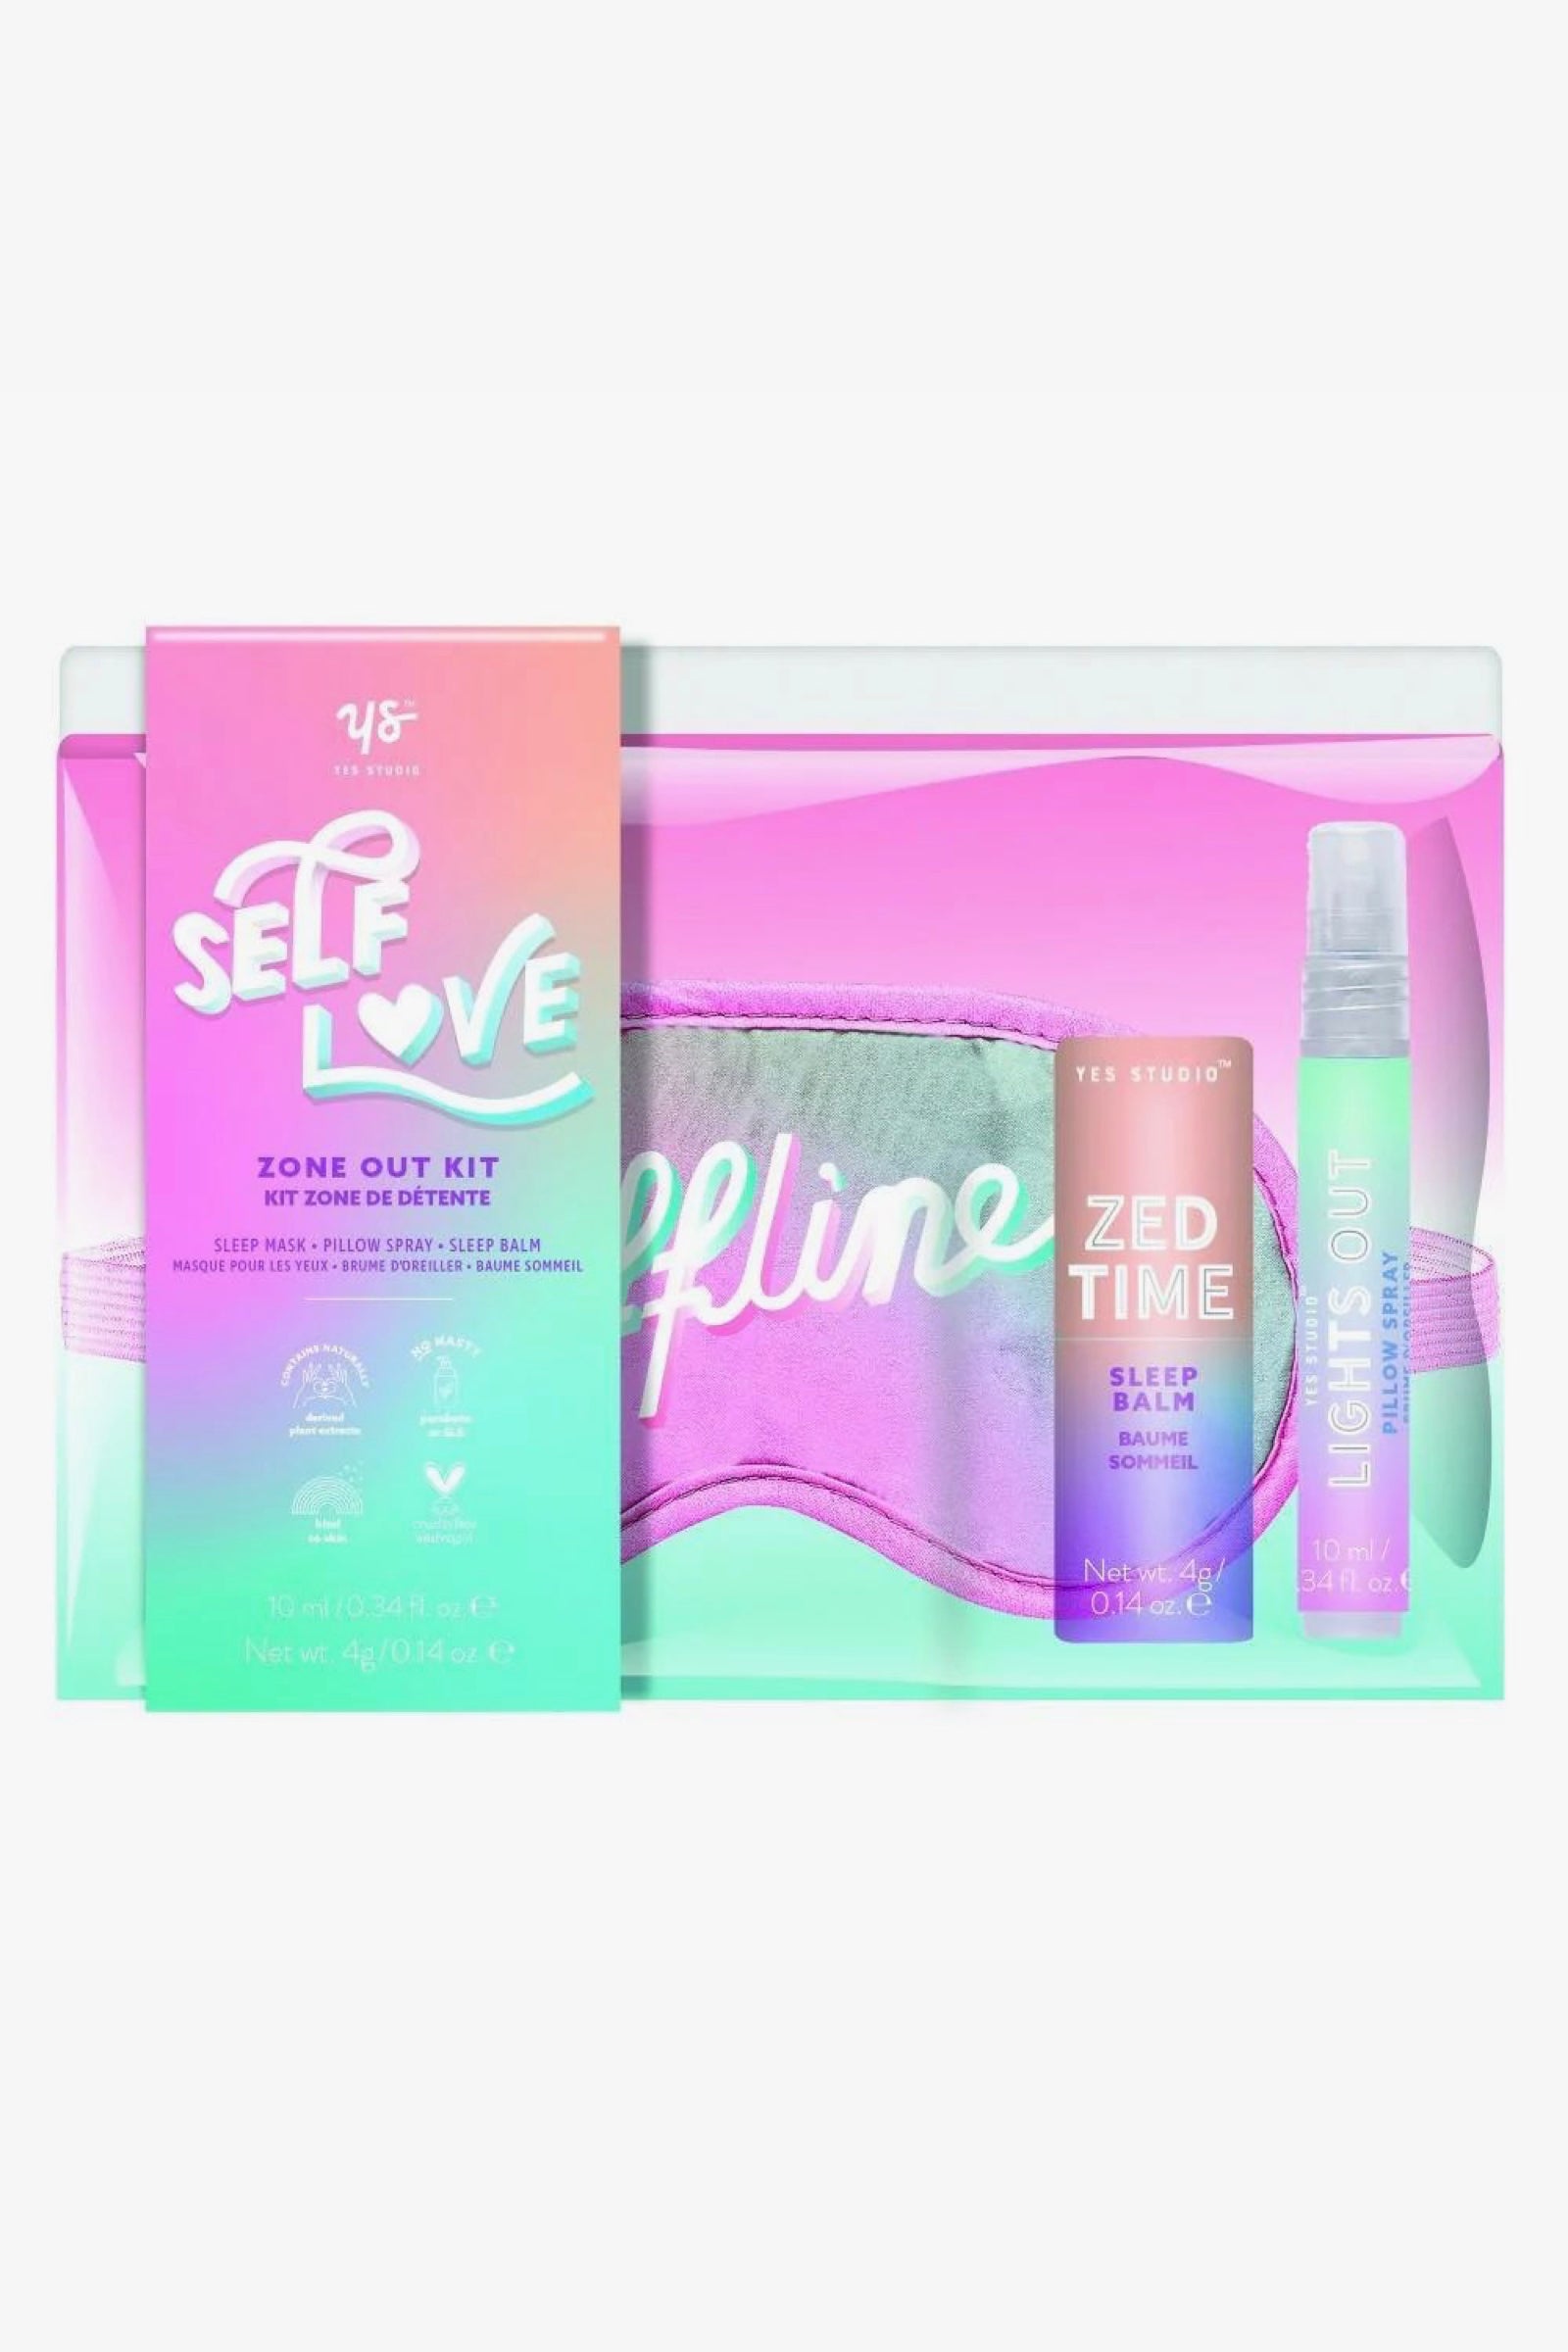 SELF LOVE ZONE OUT KIT